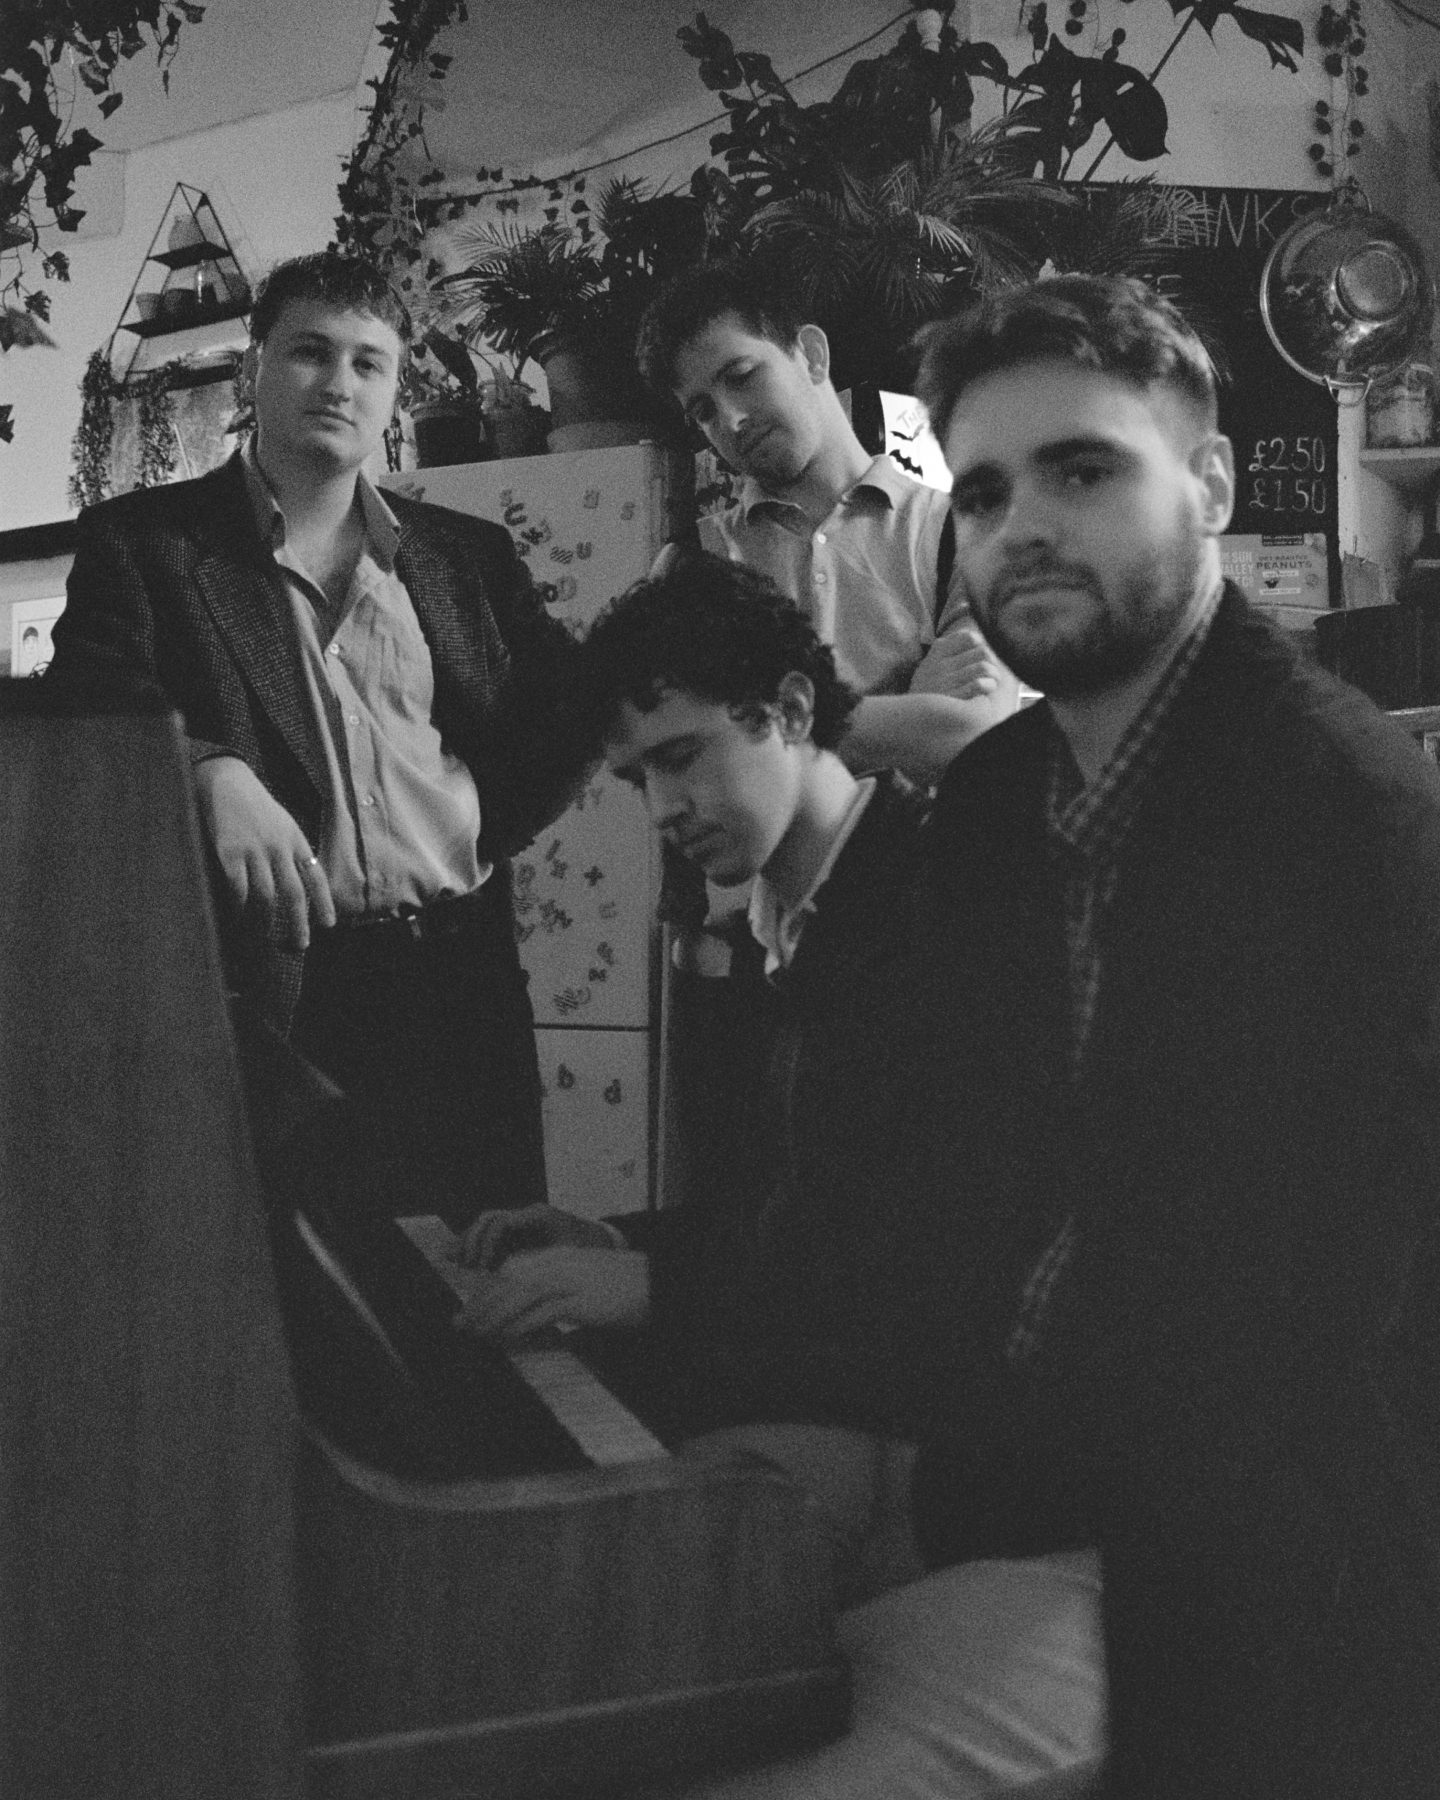 The 'Cucamaras' band in a black and white photo. 